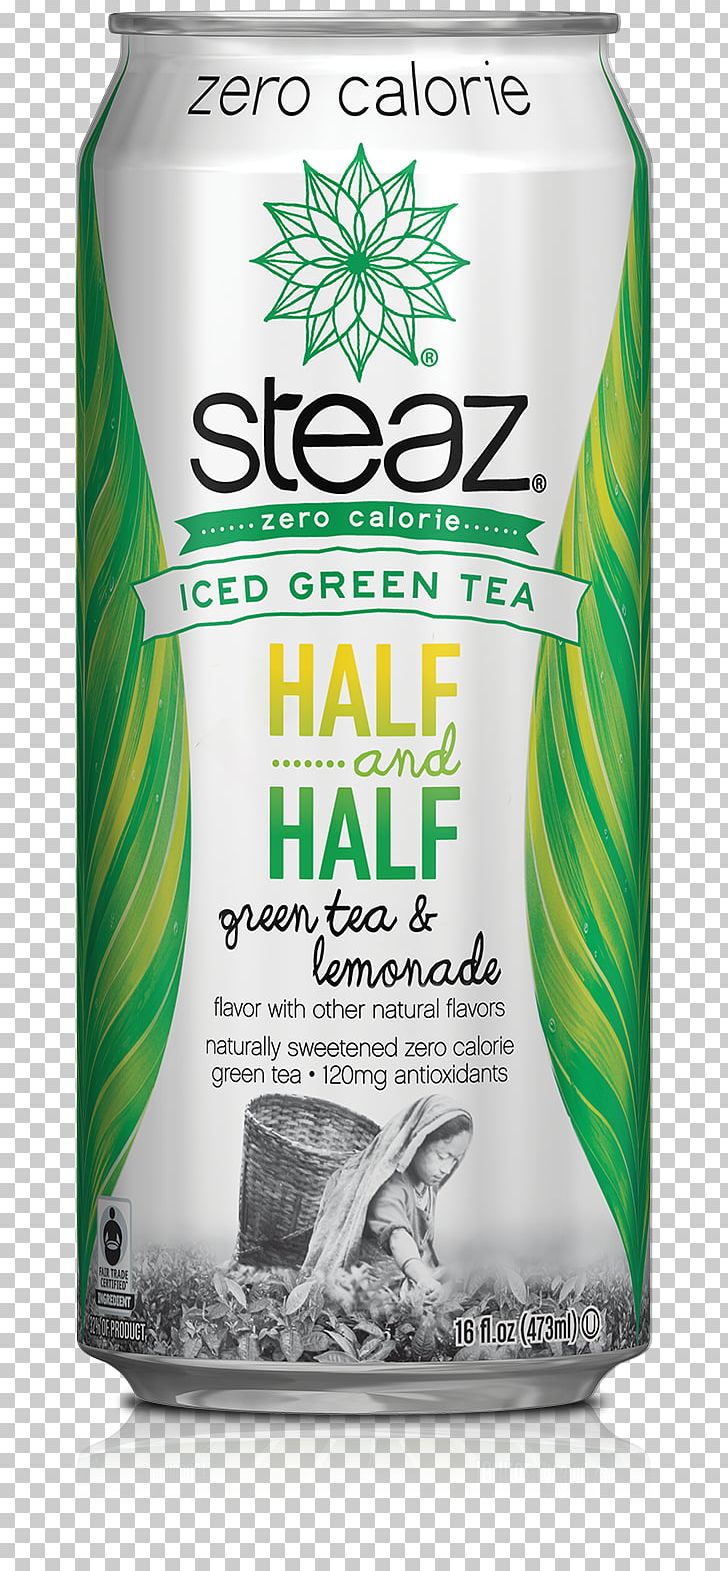 Iced Tea Green Tea Steaz Energy Drink PNG, Clipart, Beverage Can, Drink, Energy Drink, Food, Green Tea Free PNG Download